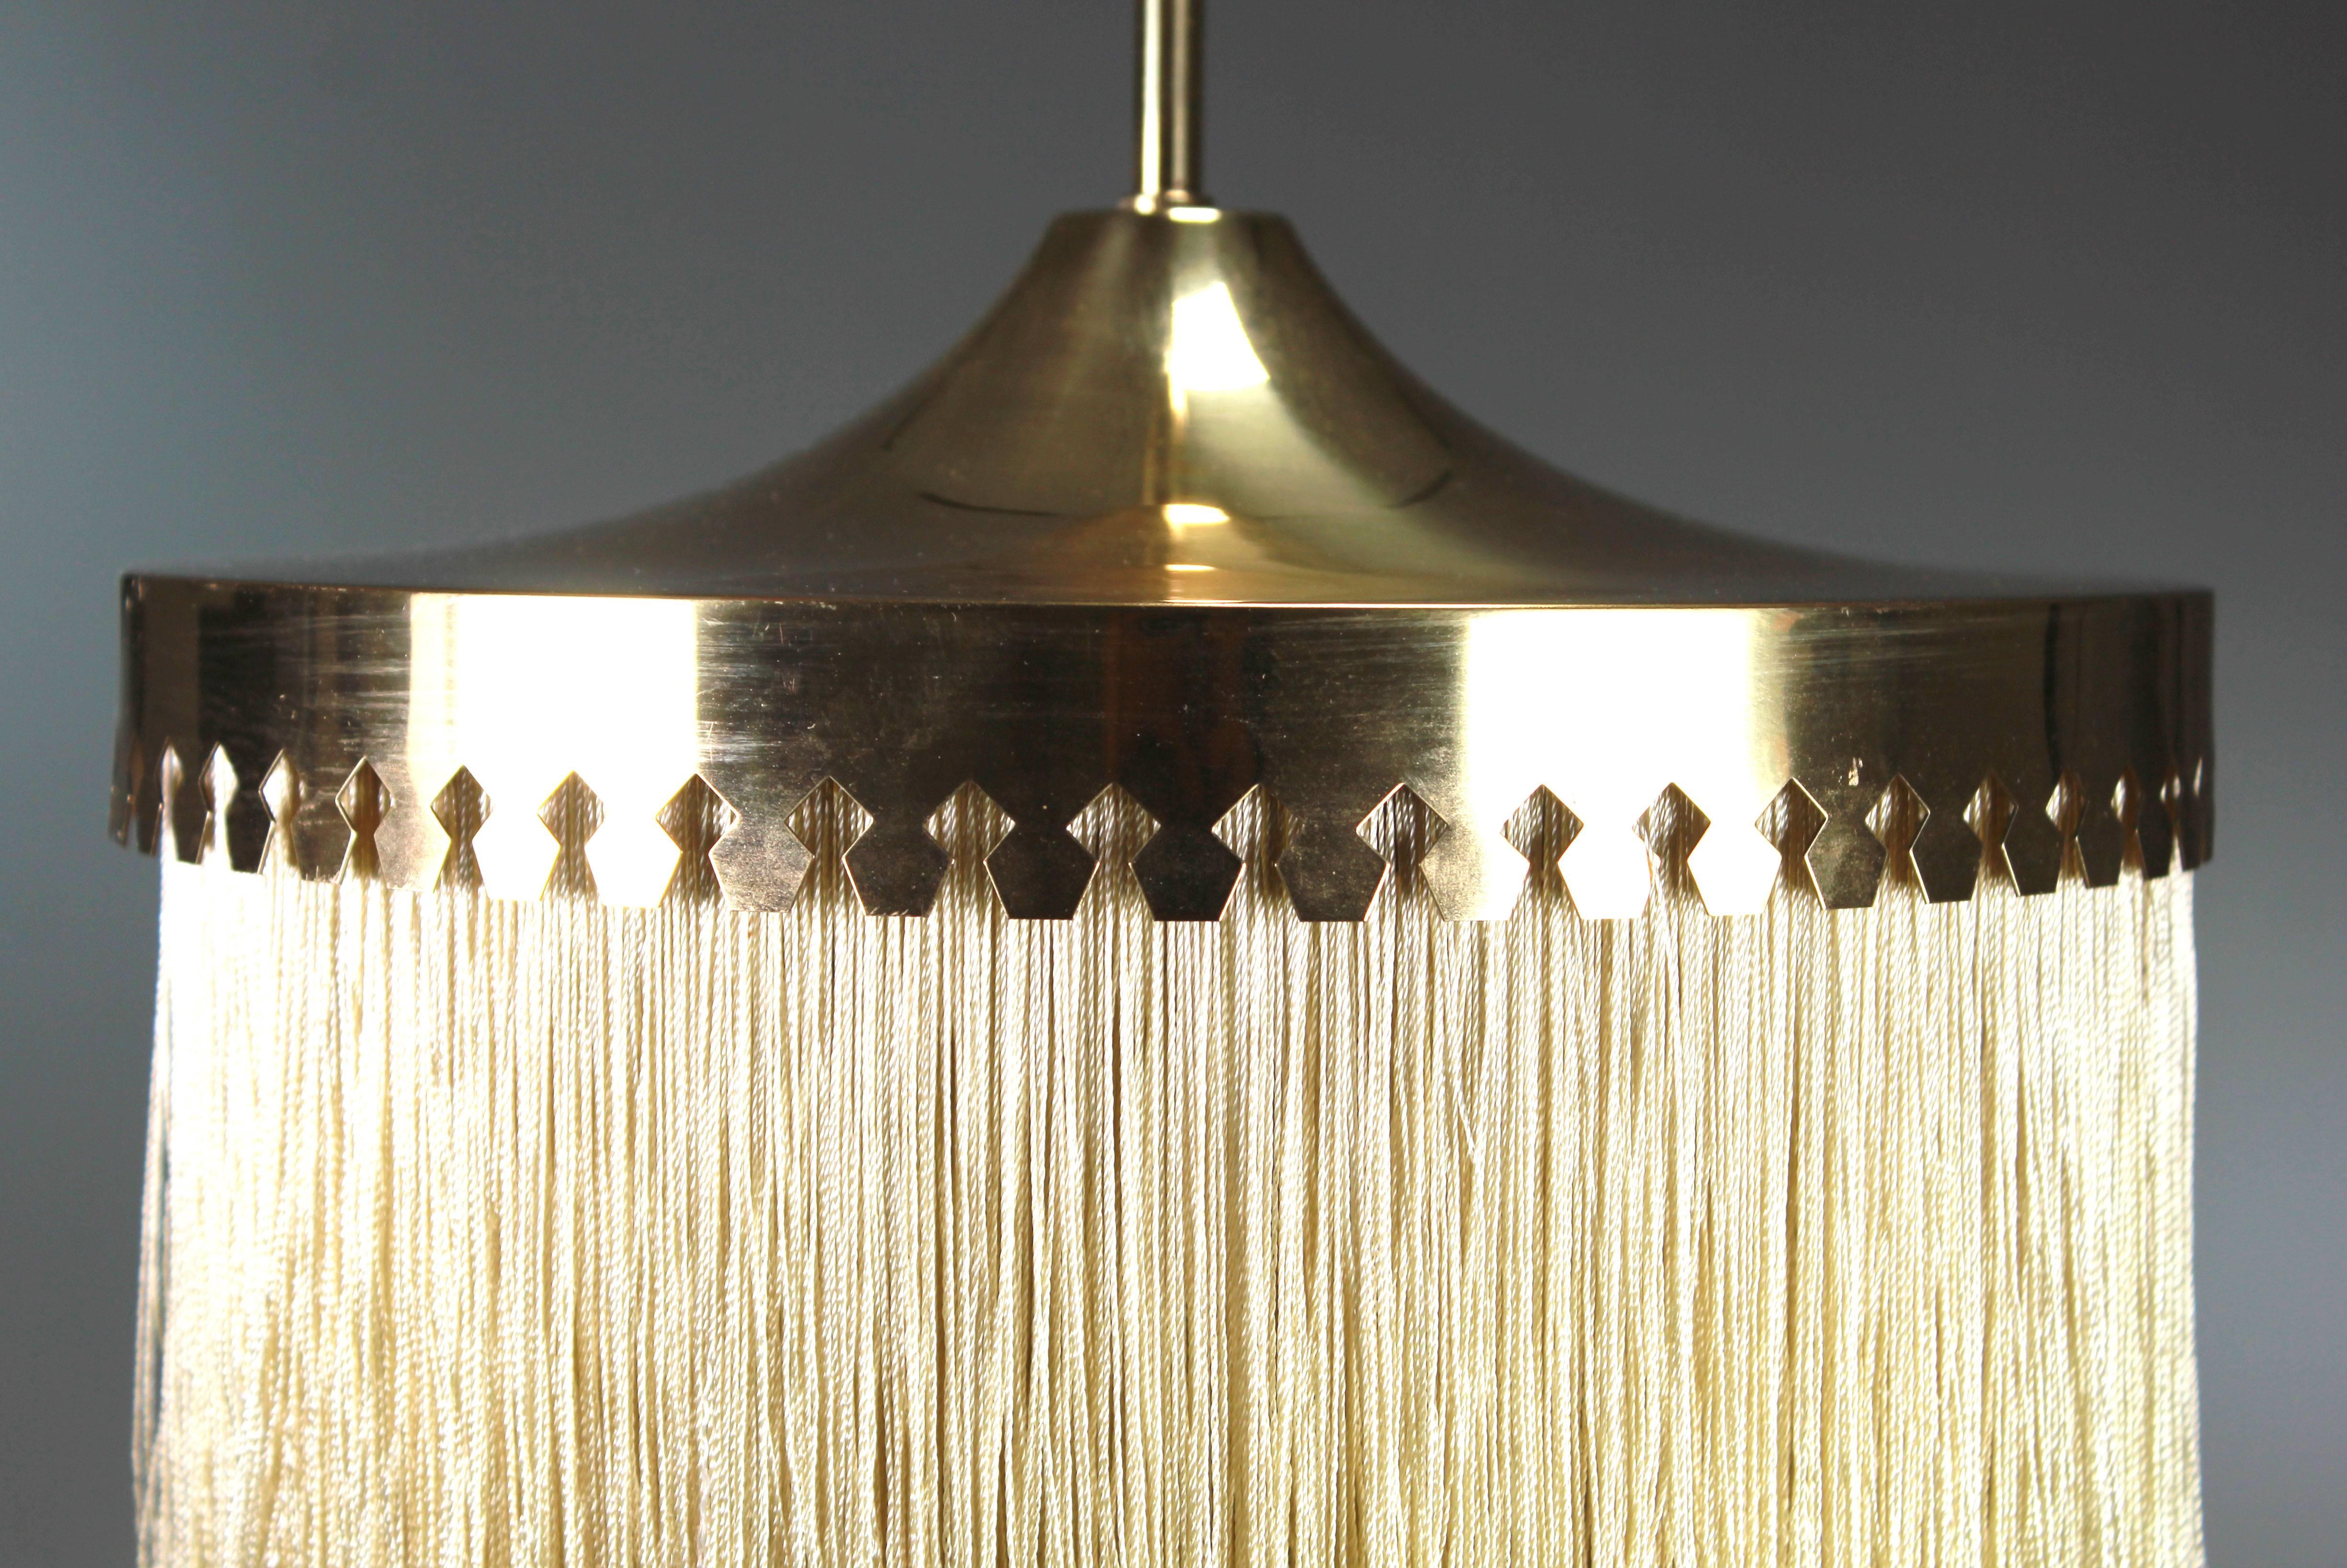 Swedish elegance! Scandinavian Mid Century Modern extraordinary pendant by the great Swedish designer Hans Agne Jakobsson. Five separate layers of sand colored silk fringes with polished brass frame and original polished brass stem. One E27 bulb